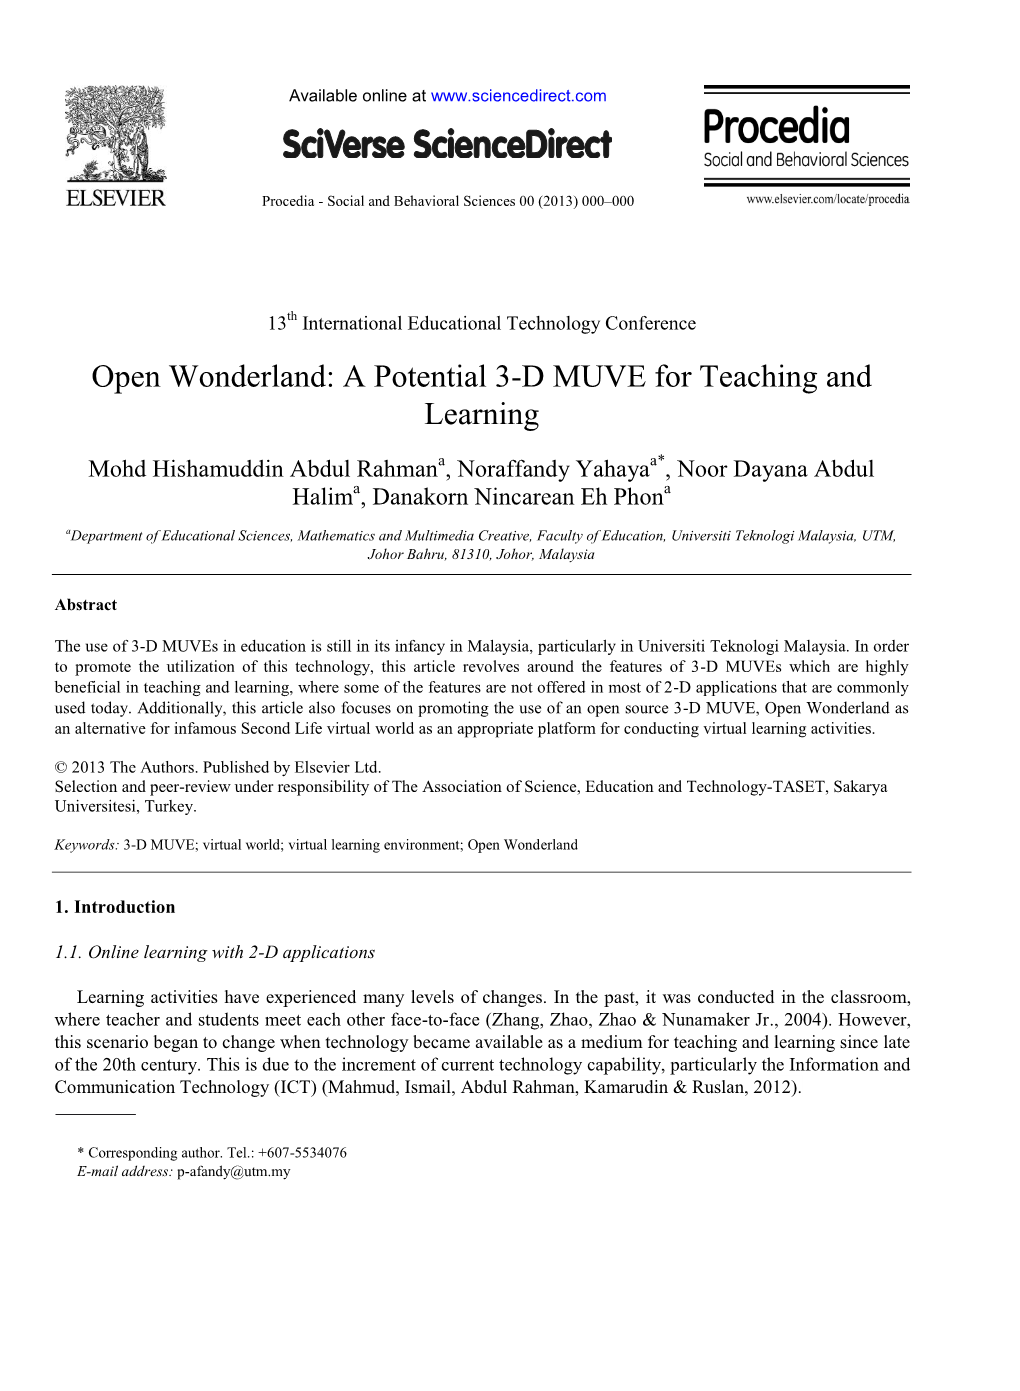 Open Wonderland: a Potential 3-D MUVE for Teaching and Learning